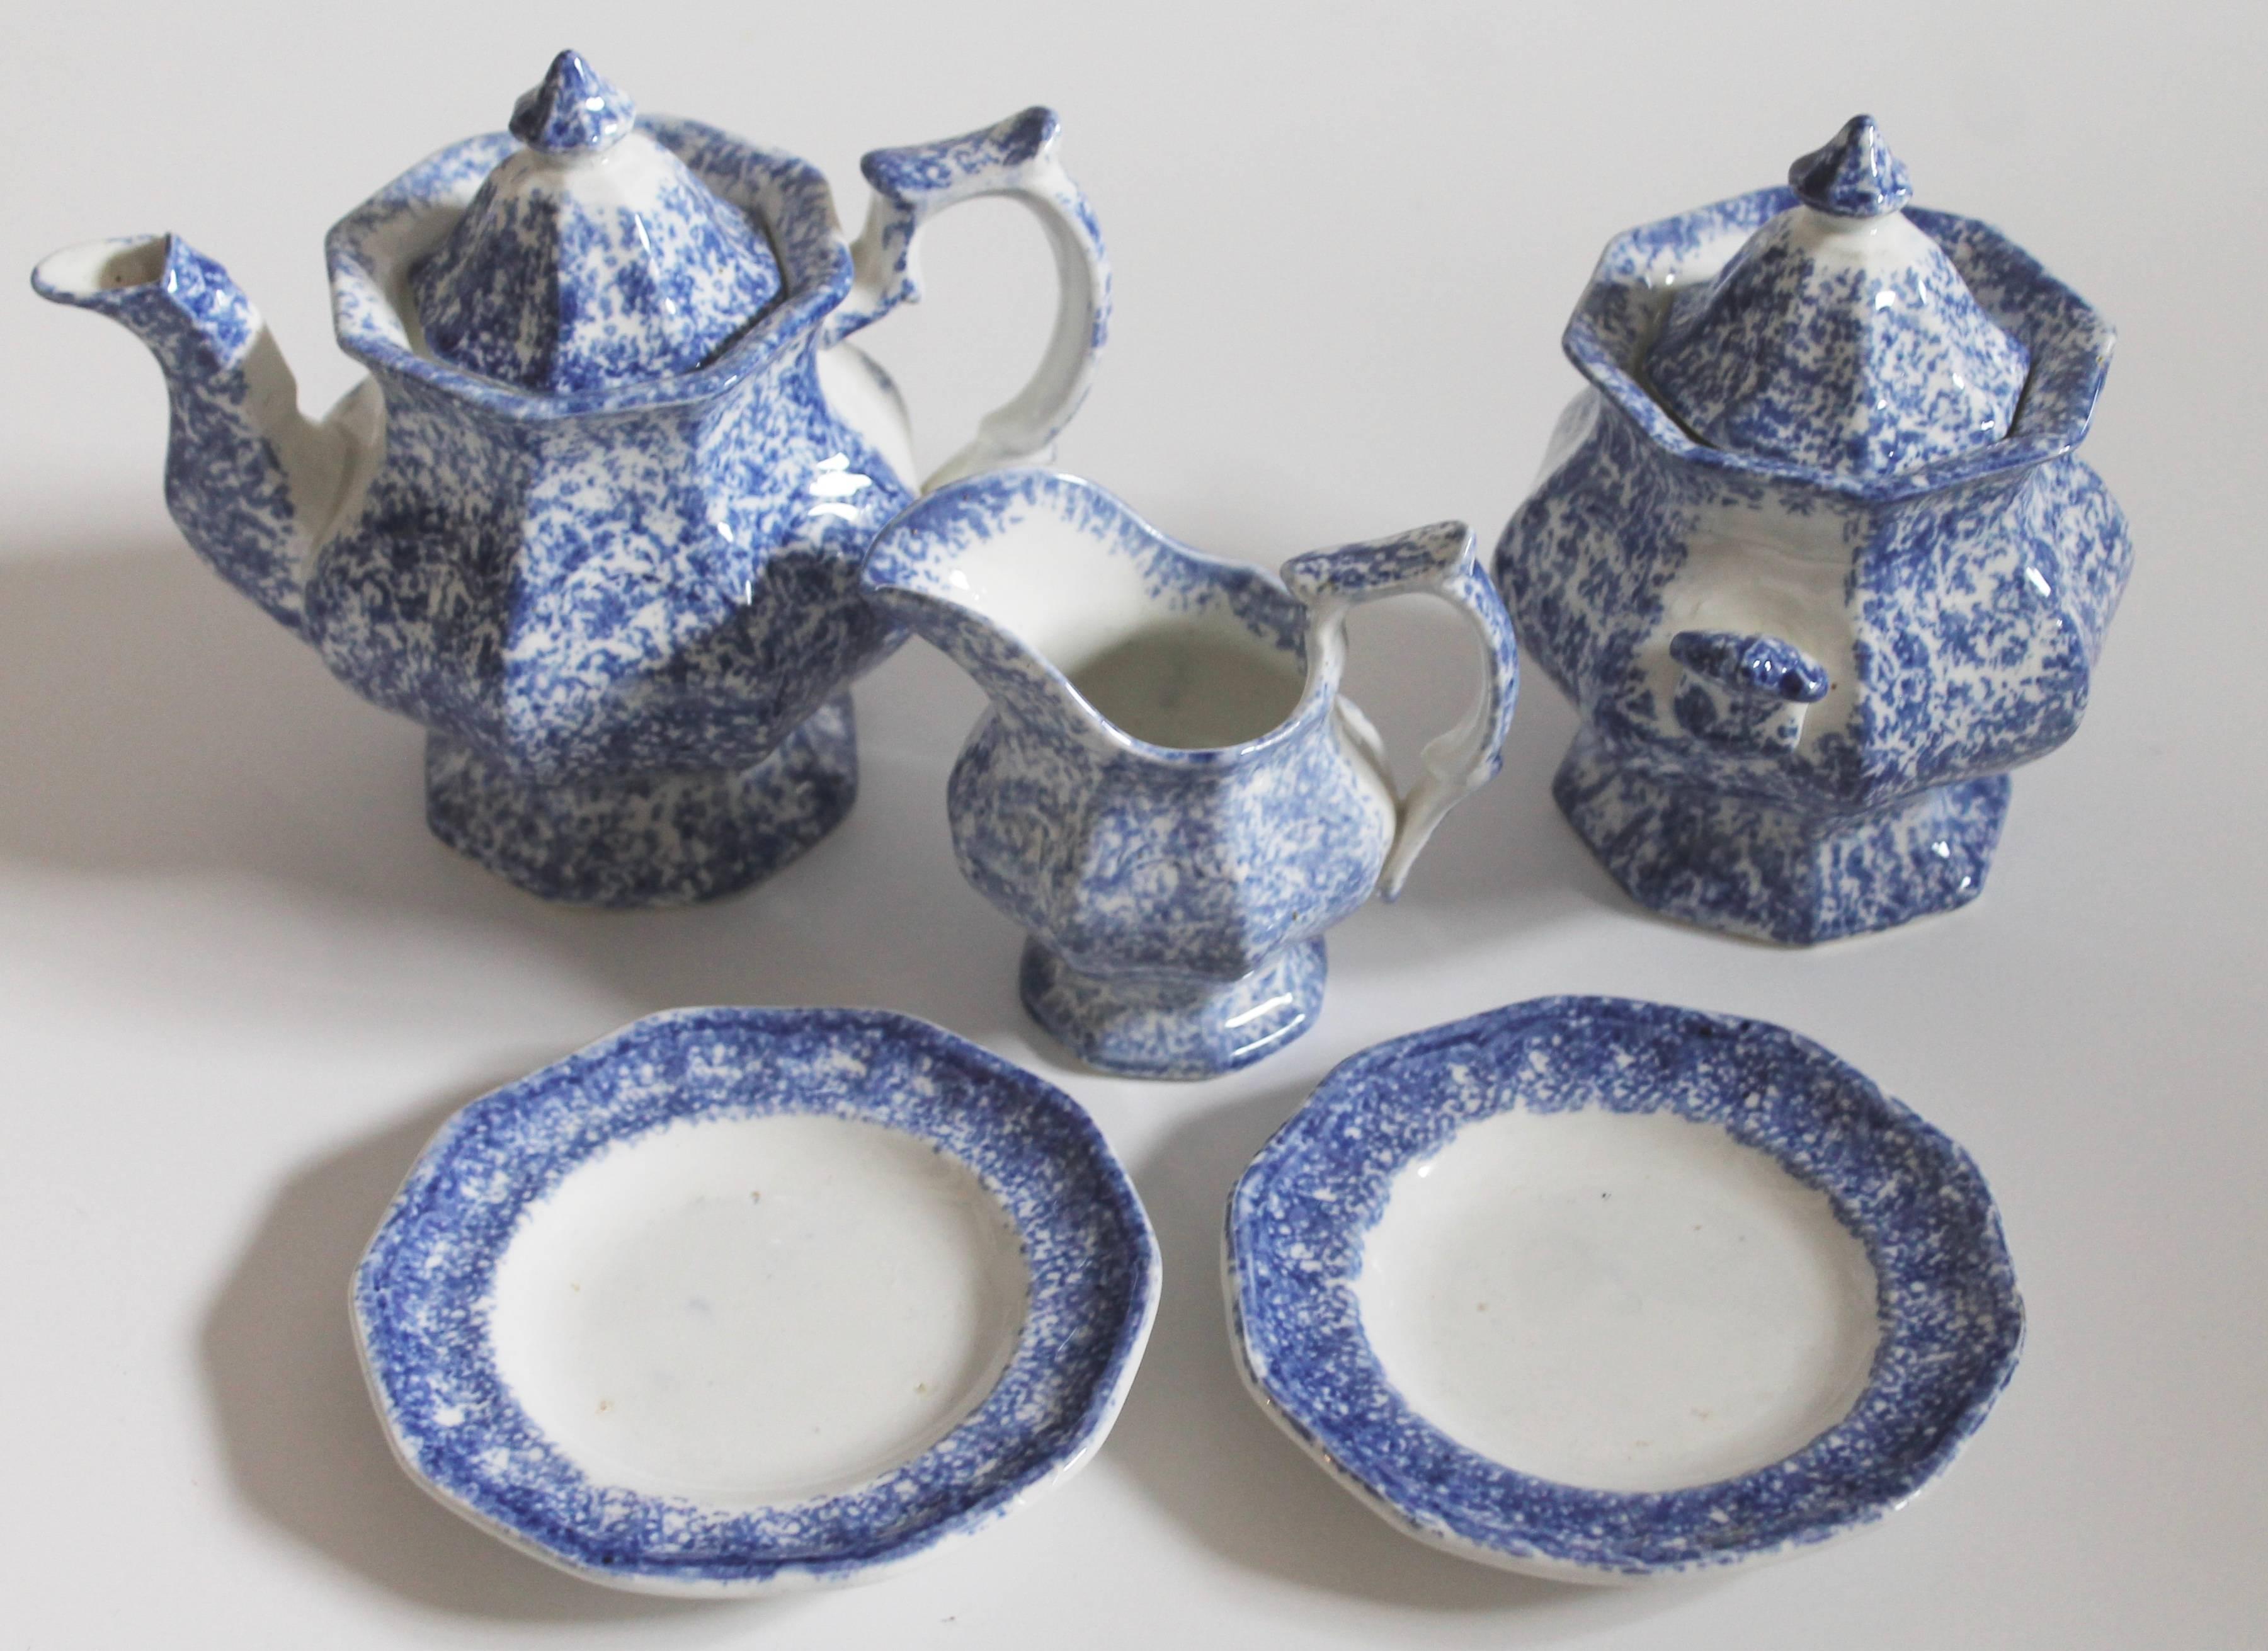 Rare 19th Century Sponge / Spatter Ware Childs Tea Set In Excellent Condition For Sale In Los Angeles, CA